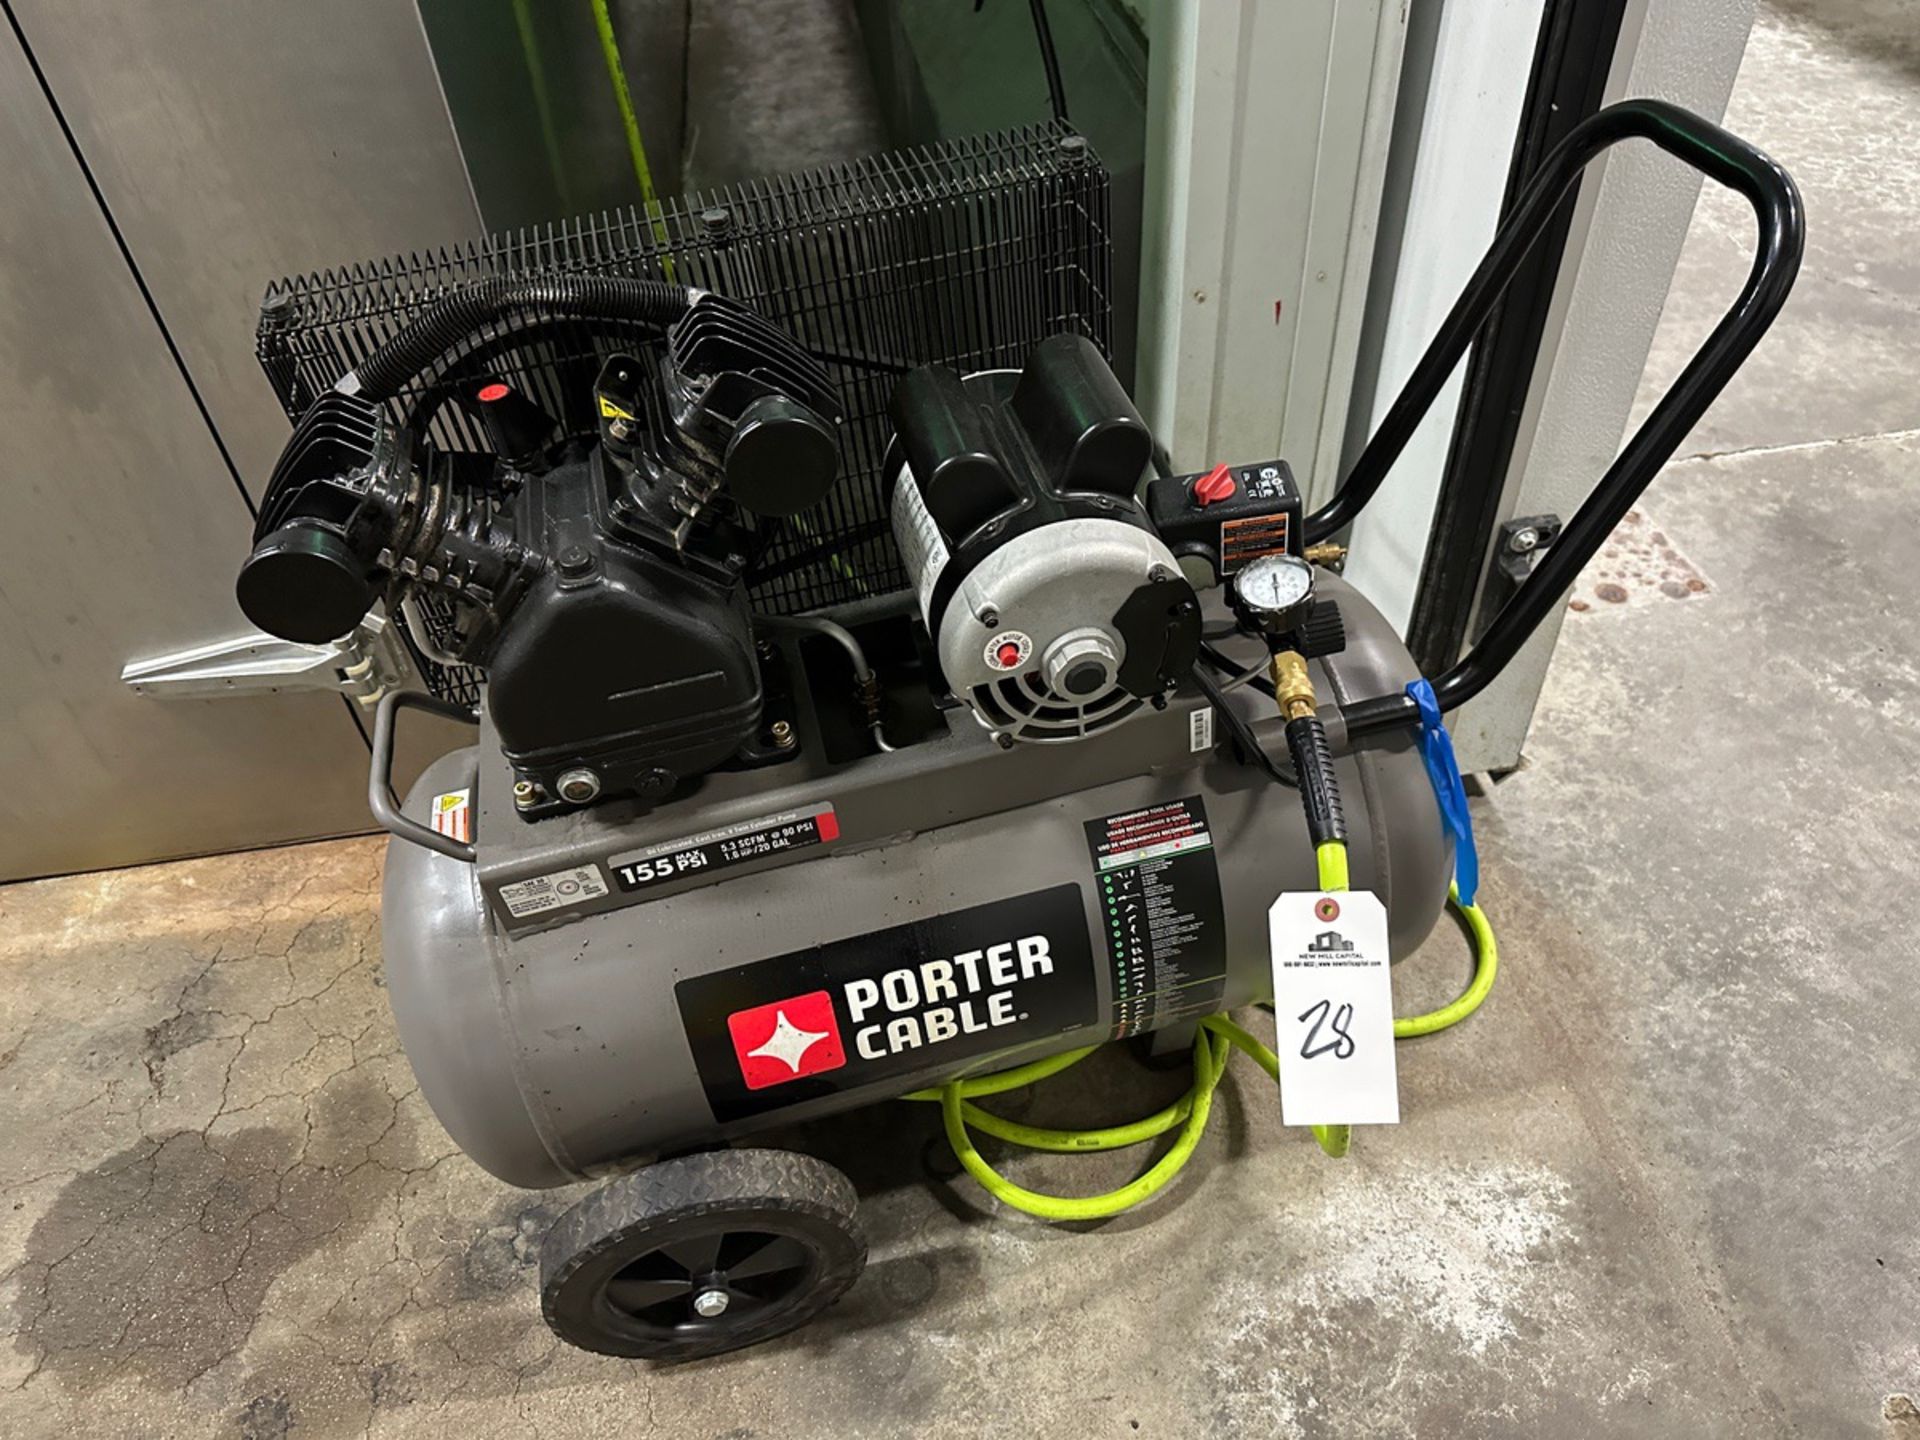 Porter Cable 20 Gallon, 155 Max PSI Air Compressor - Model PXCM201, S/N X21900213 | Rig Fee $50